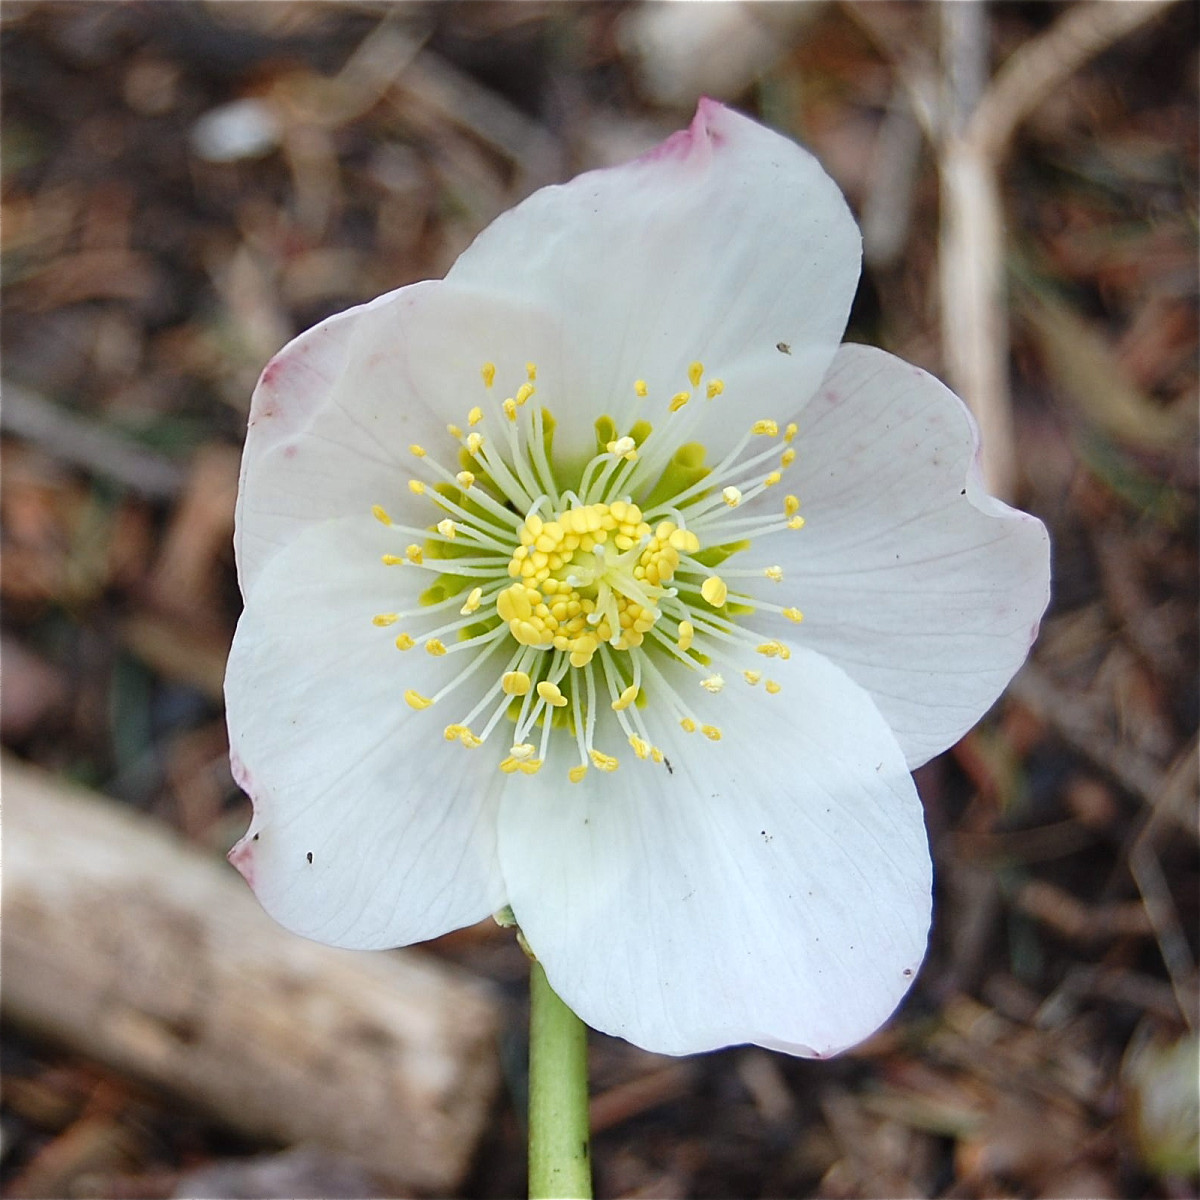 A flower of the Christmas rose, or Helleborus niger